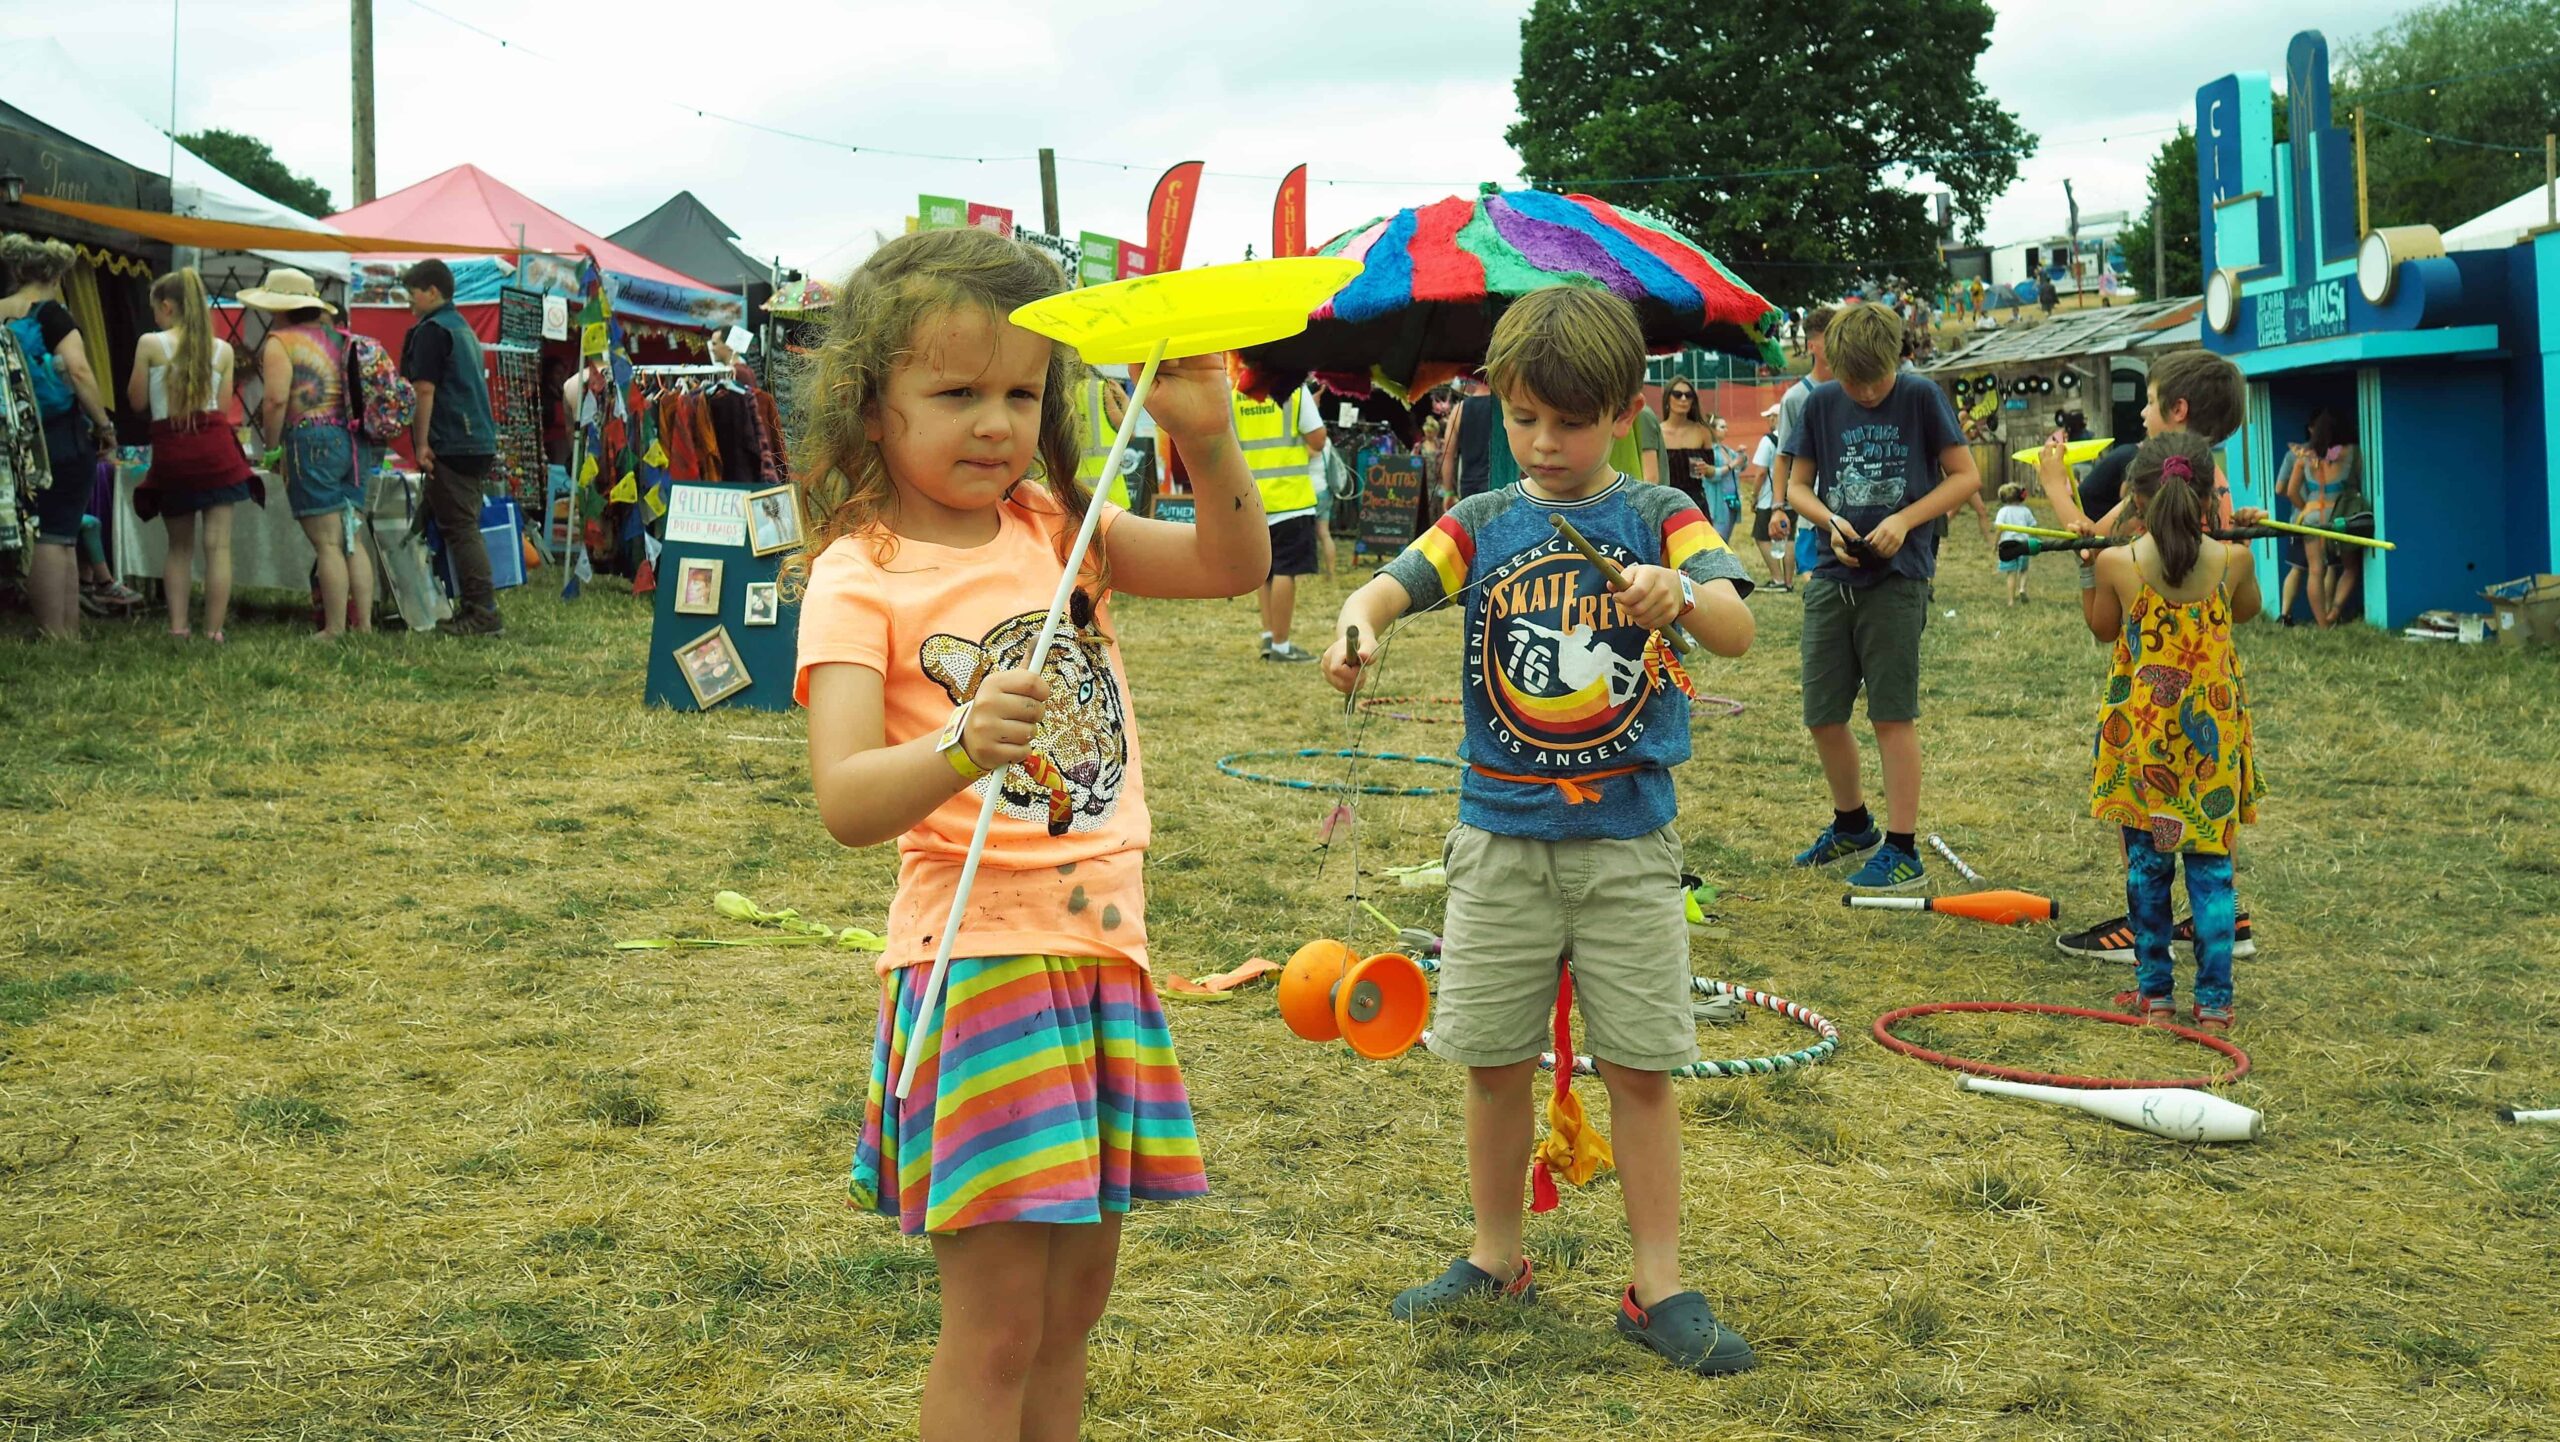 Our first family festival at Nozstock!